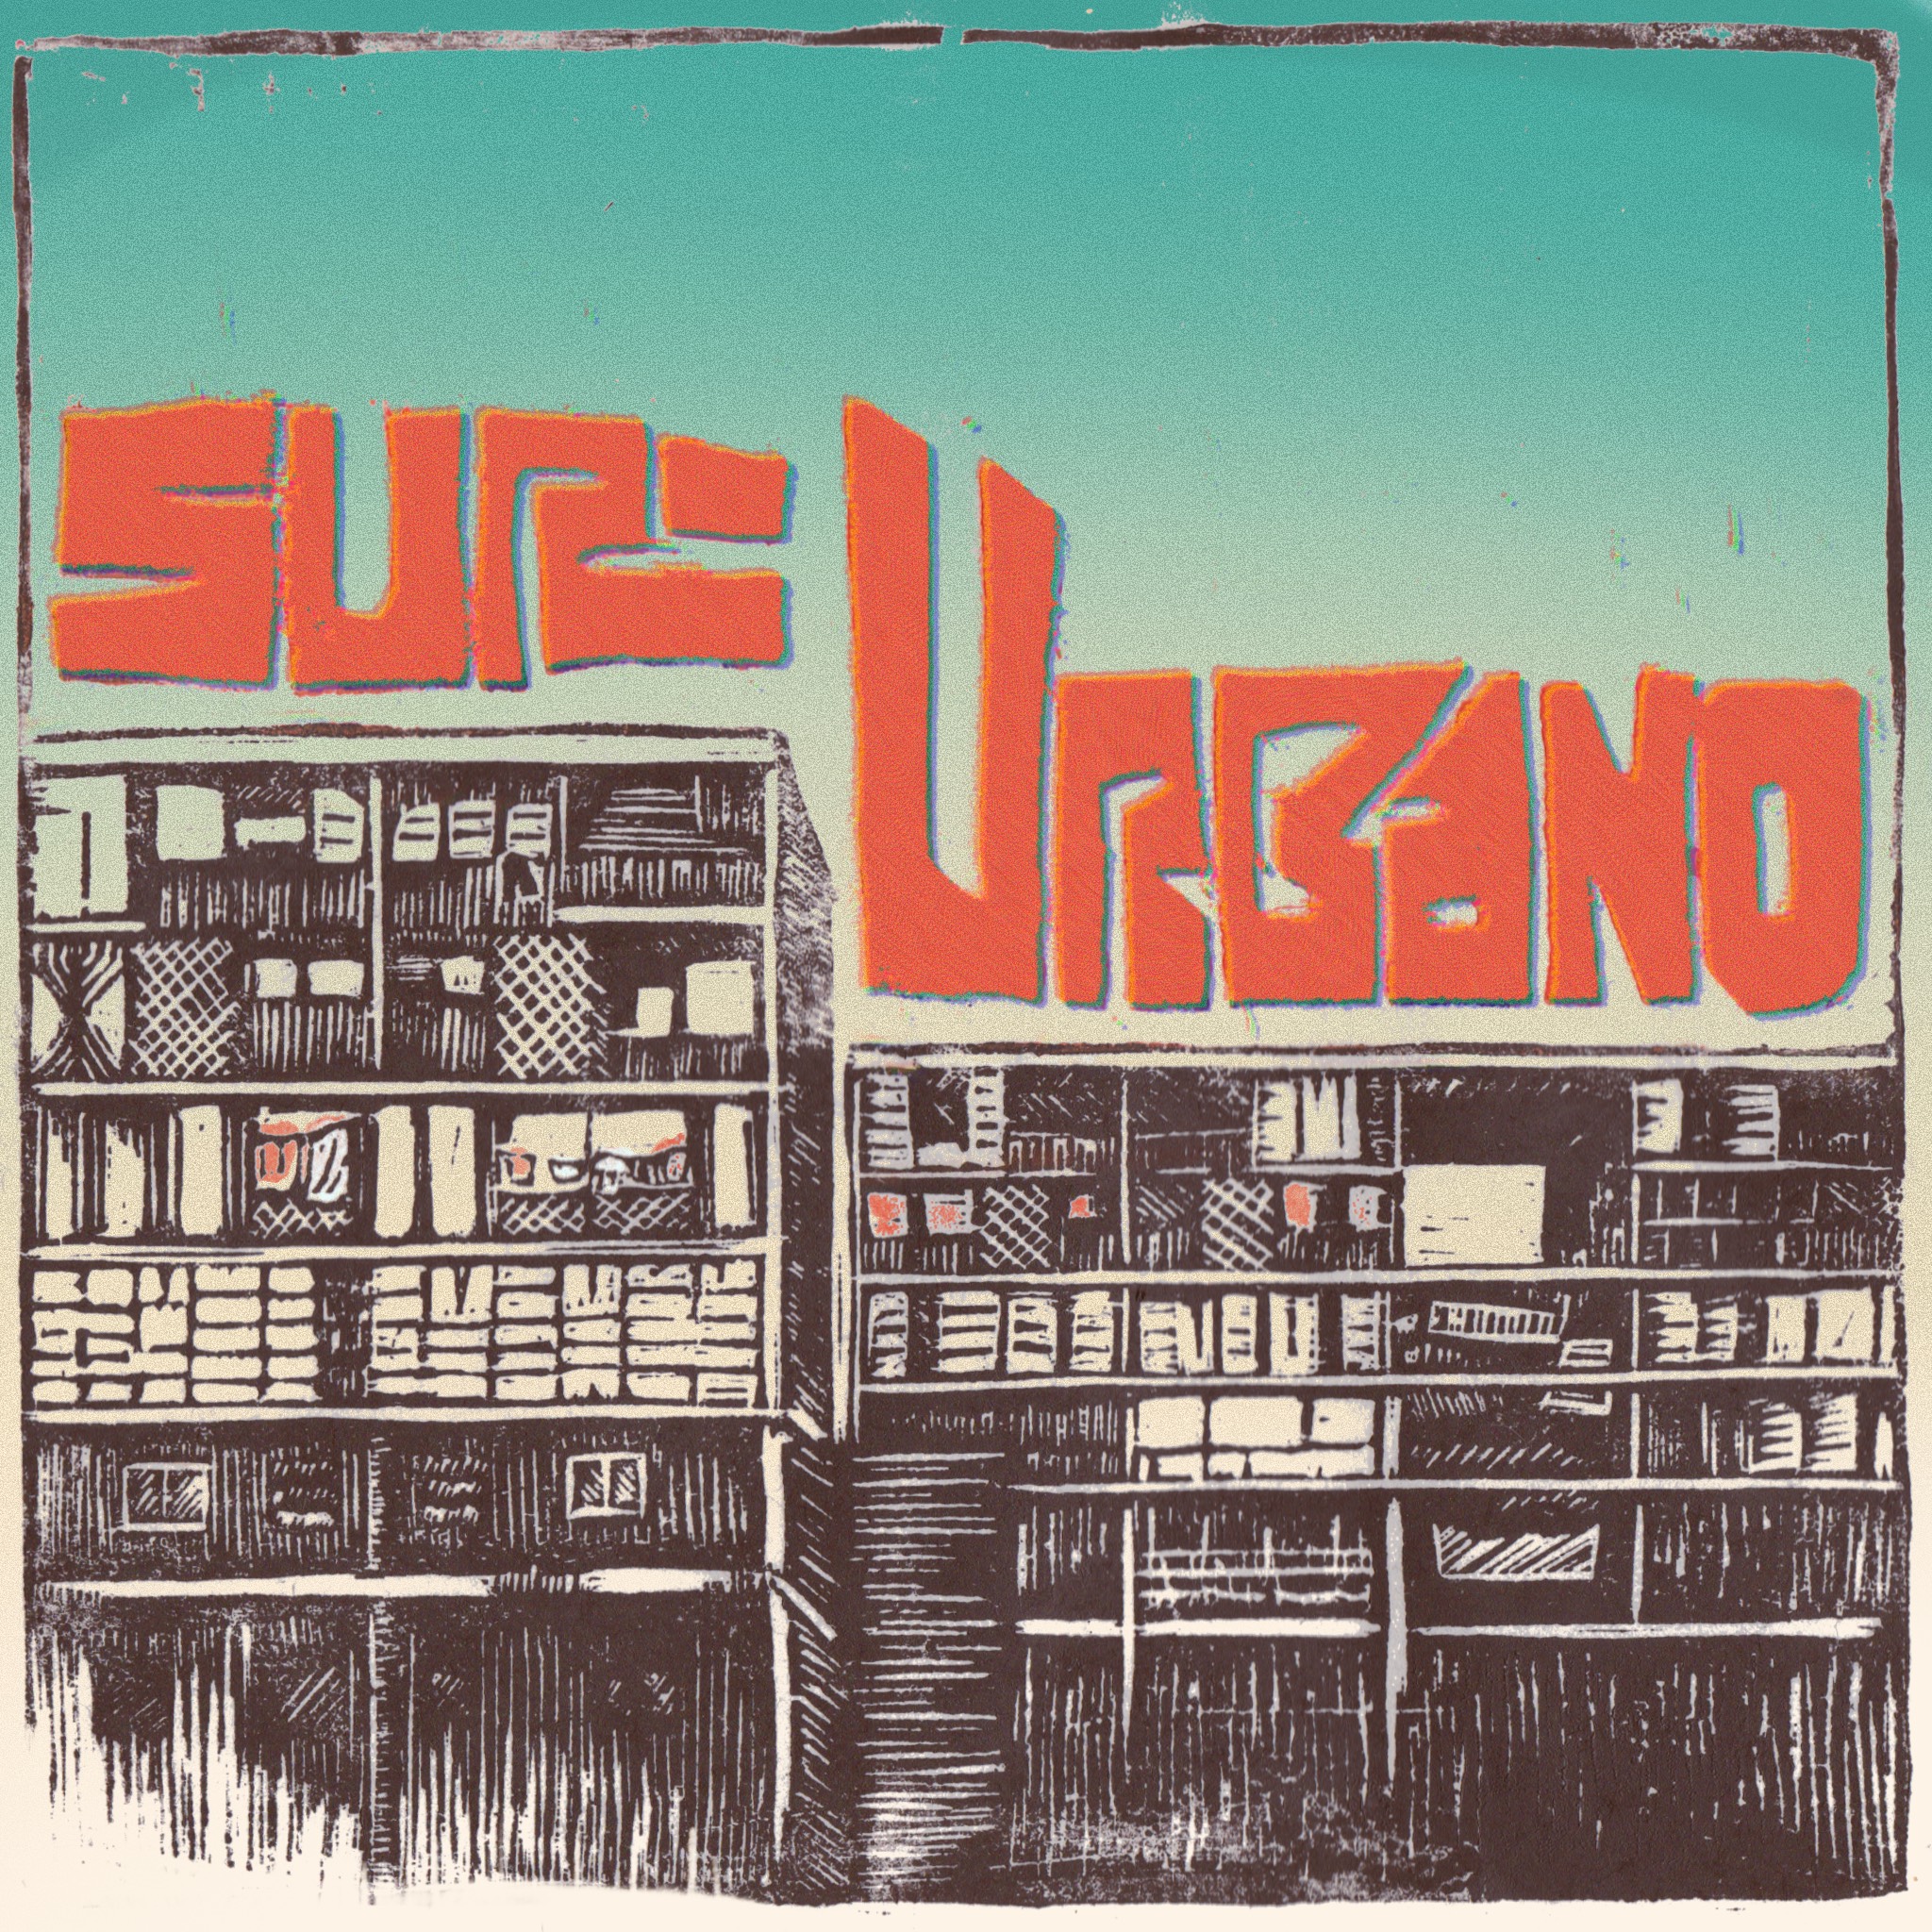 Sur-Urbano: A podcast for Latin American Cities